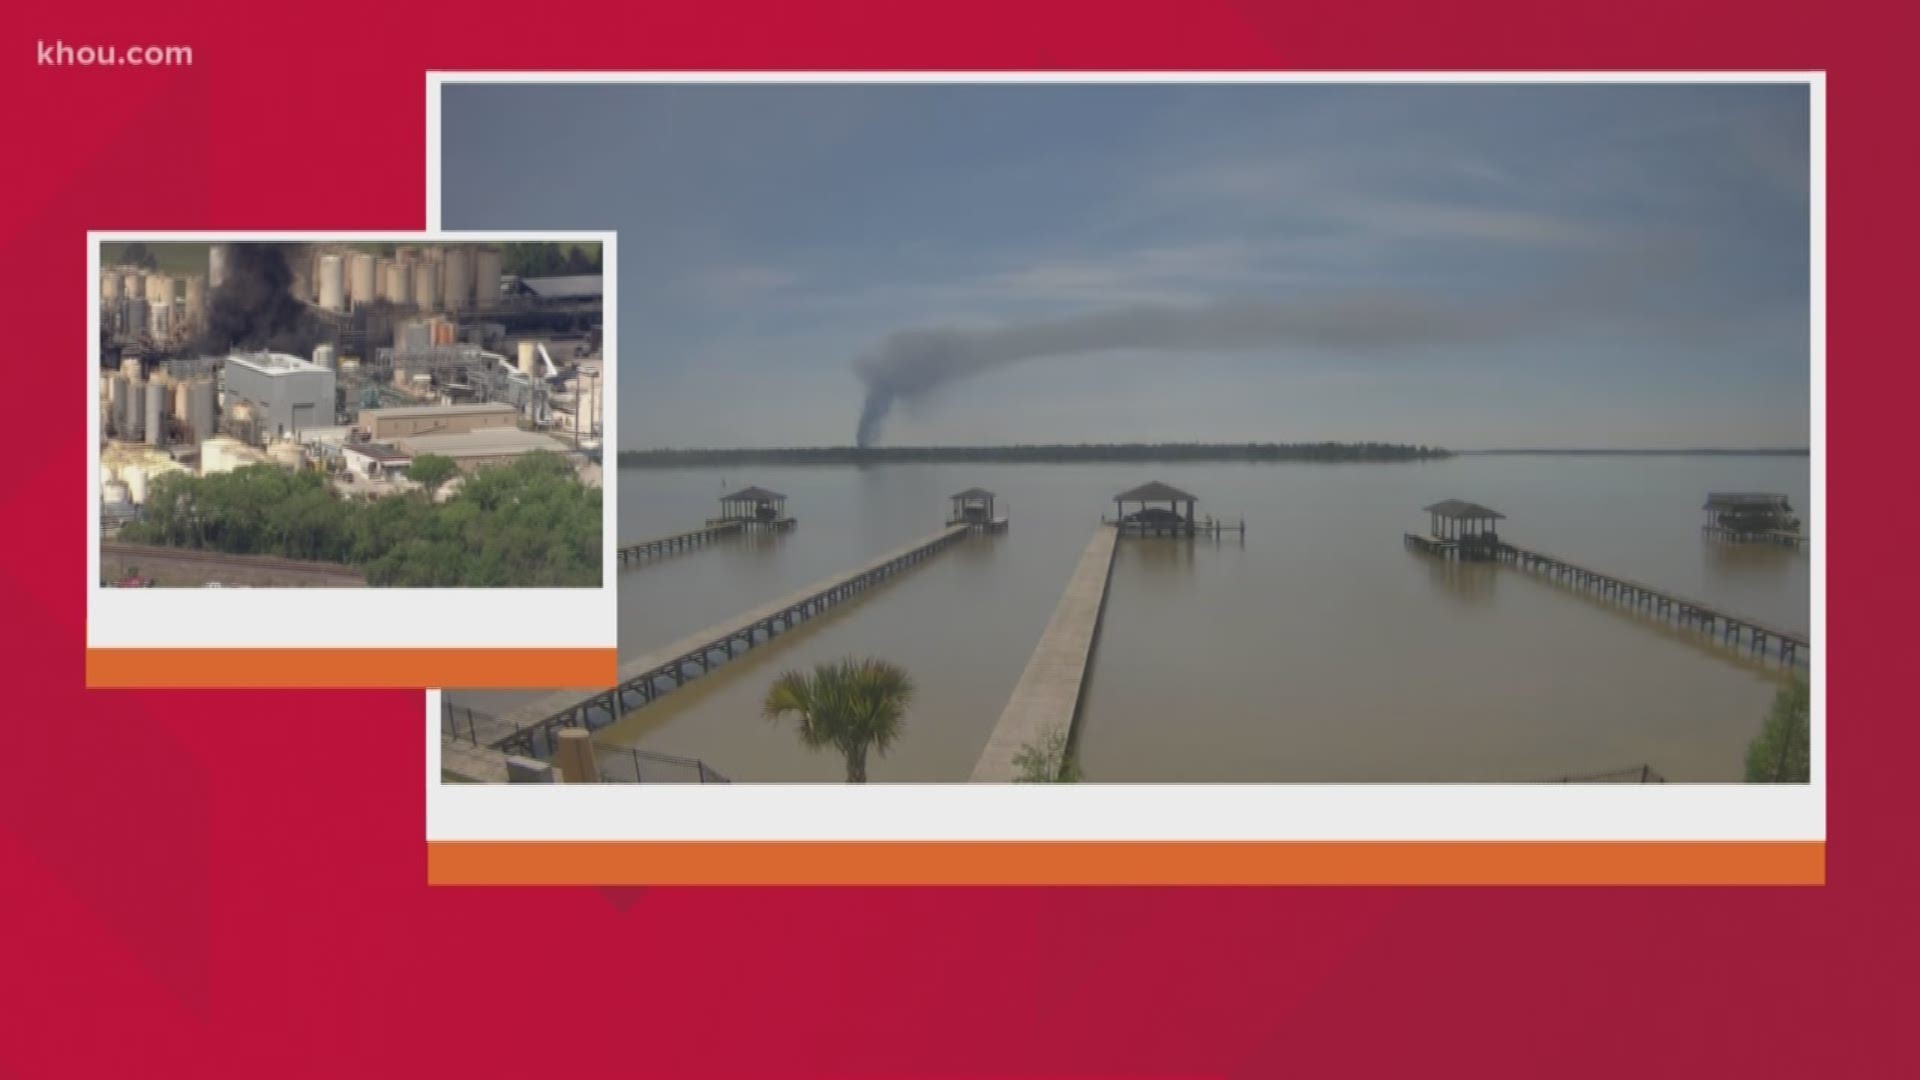 A viewer sent in a time-lapse they recorded from a distance of the KMCO chemical plant explosion in Crosby.